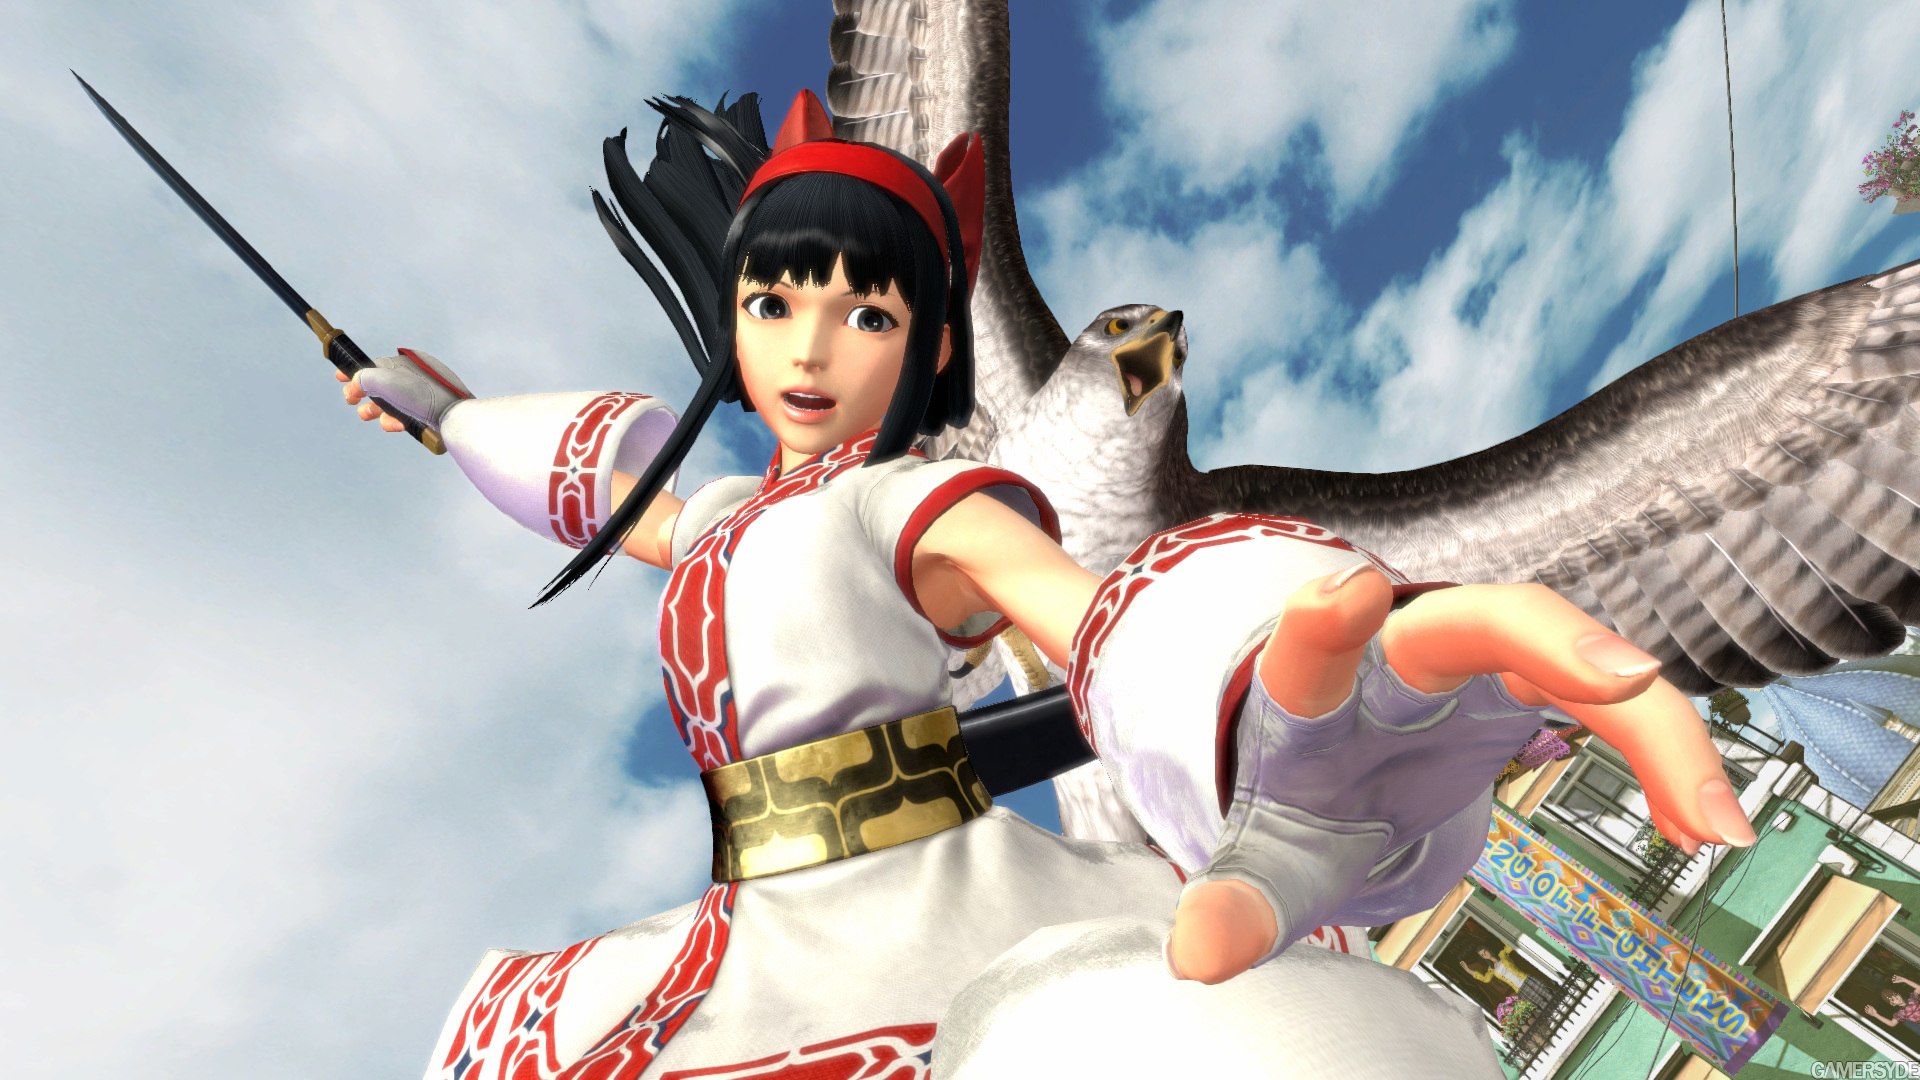 image_the_king_of_fighters_xiv-31591-3386_0006.jpg